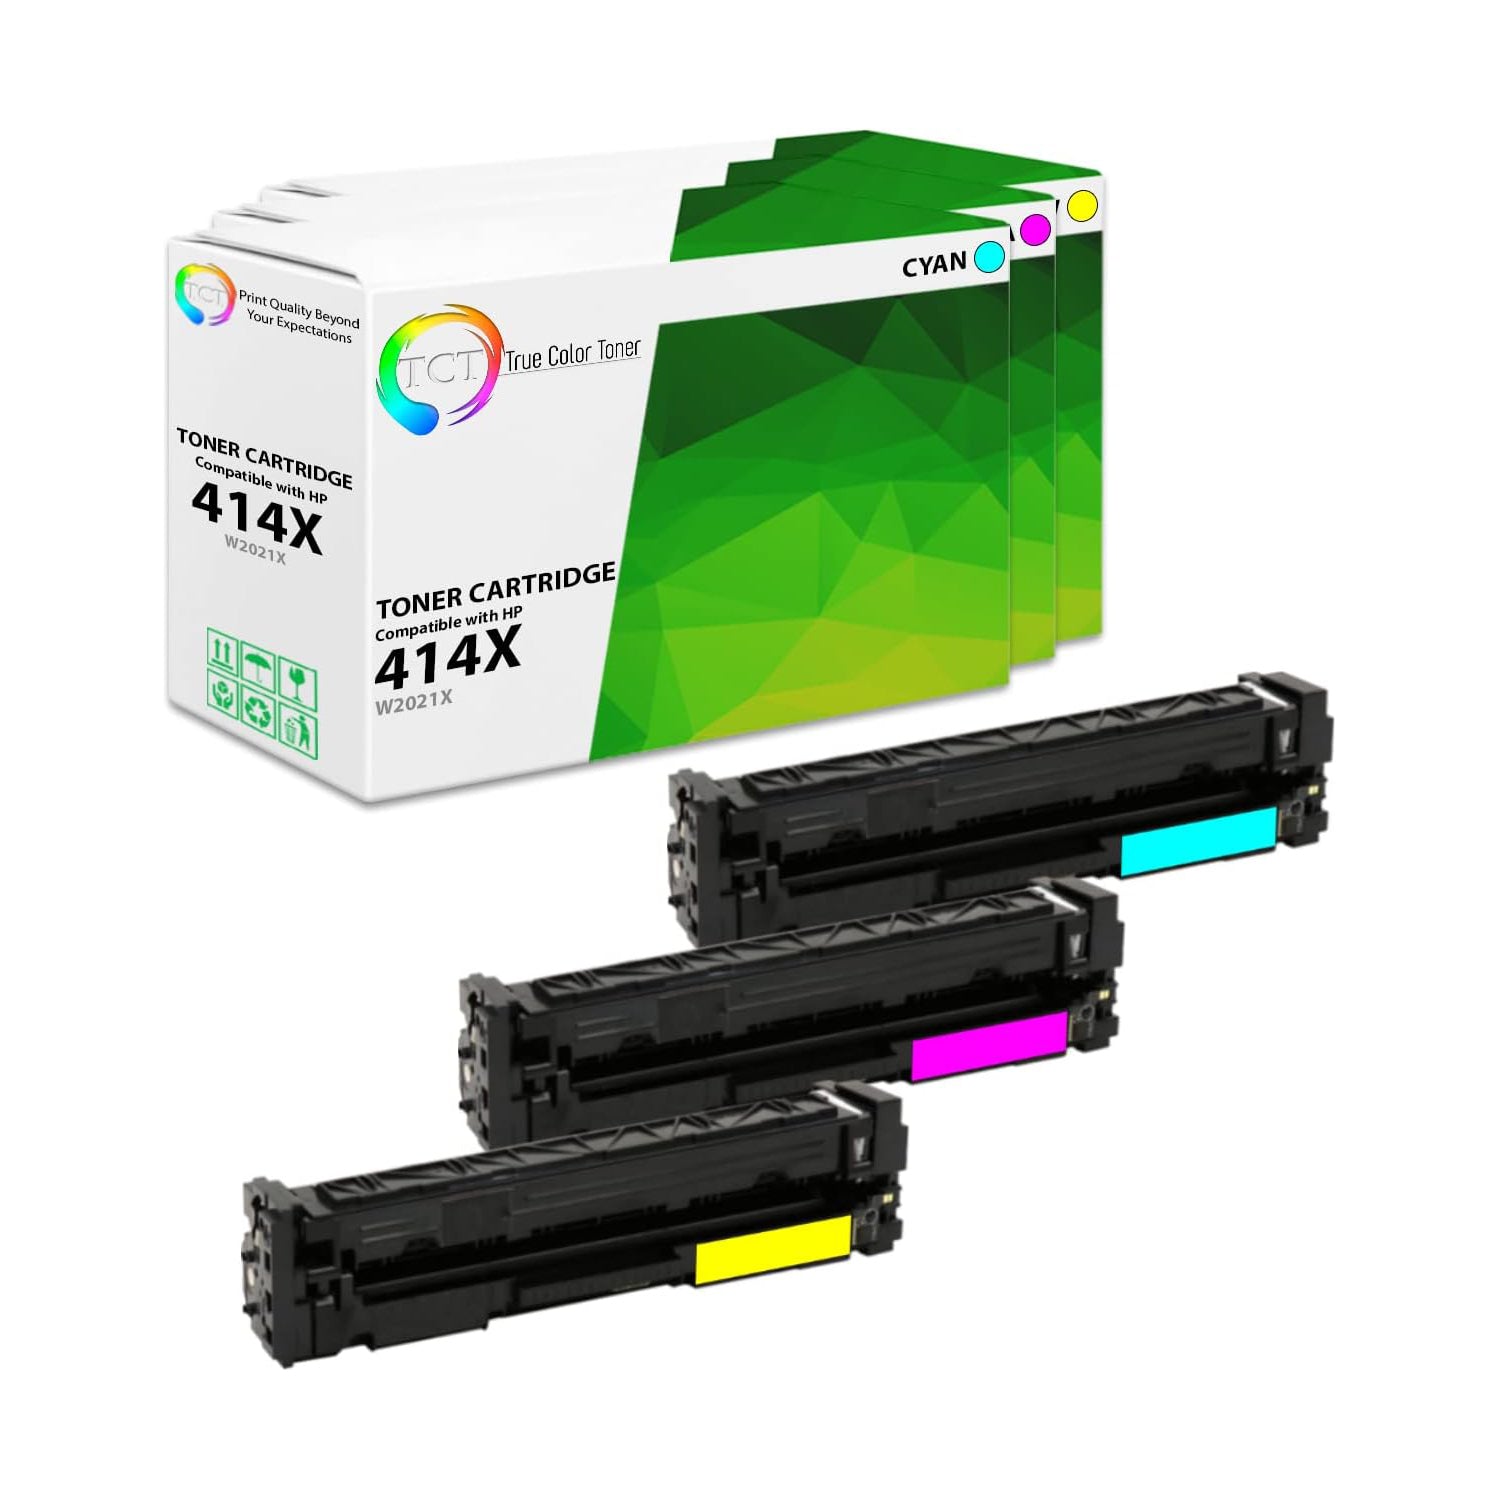 TCT Compatible High Yield Toner Cartridge Replacement for the HP 414X Series - 3 Pack (C, M, Y)